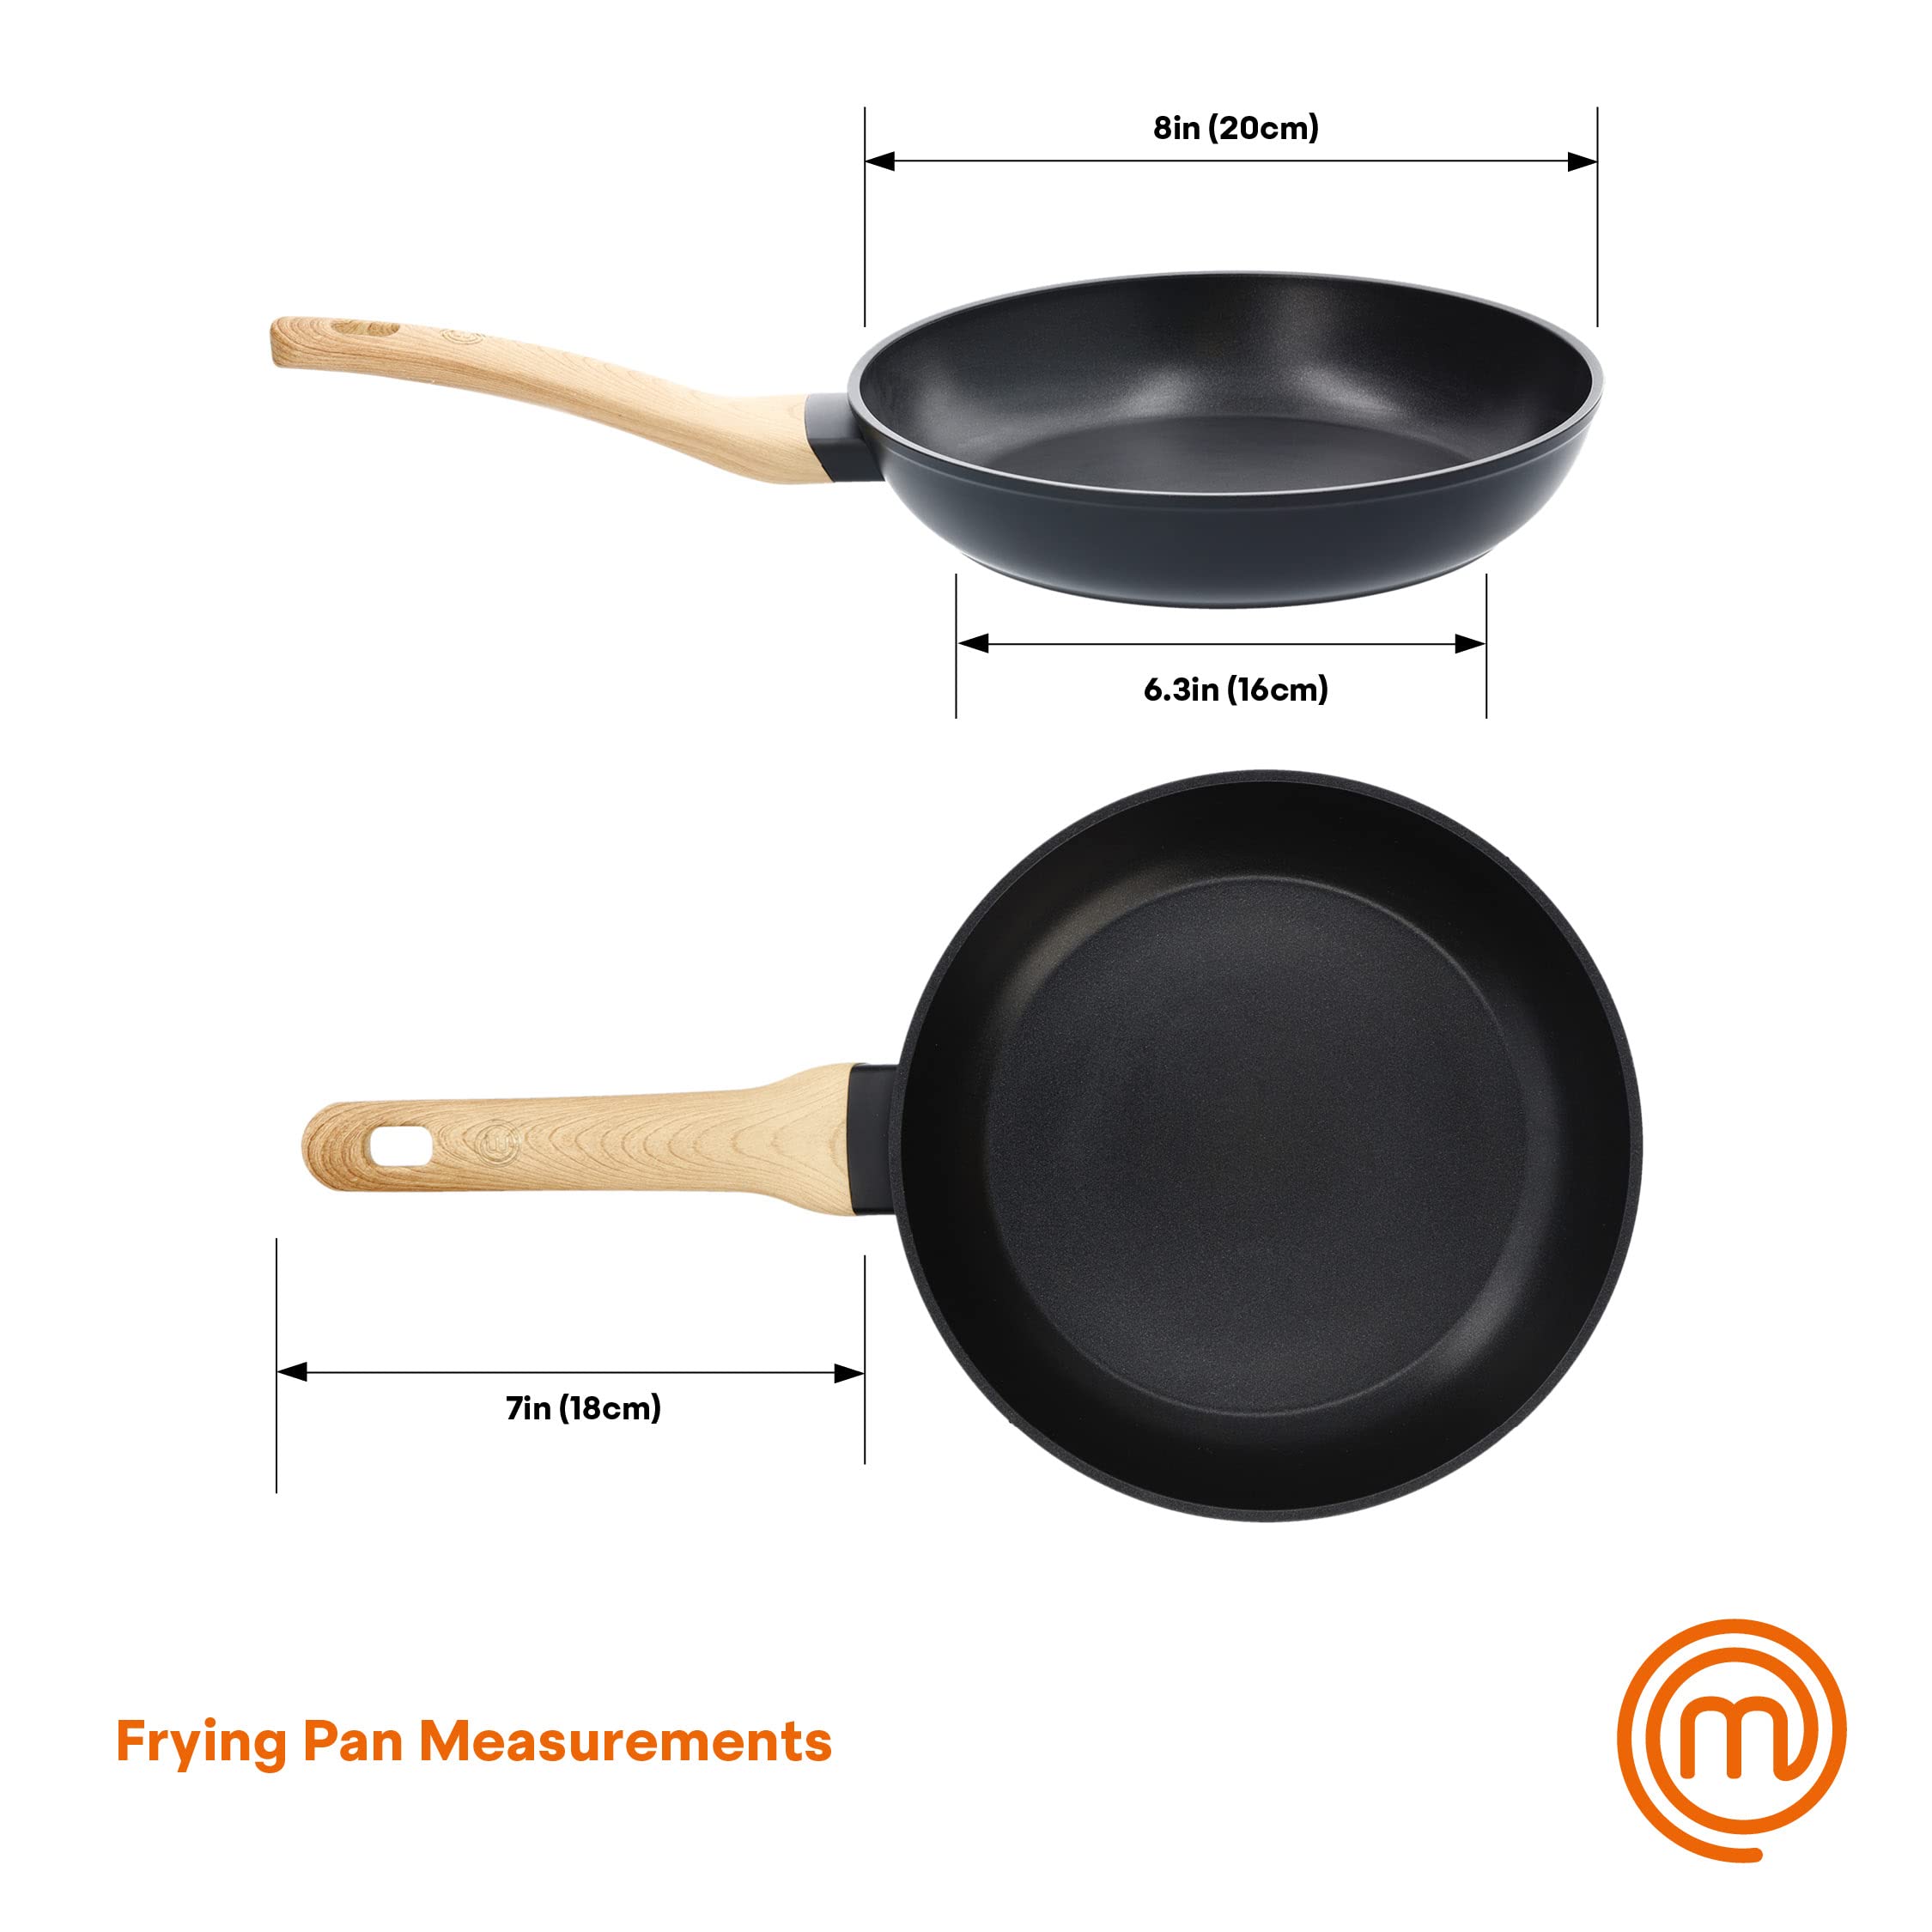 MasterChef Nonstick Frying Pan 8 inch Skillet, Small Fry Pan for Cooking Eggs, Omelette etc, Stainless Aluminum Saute Pan, Non Stick, Induction Cooktop Compatible, Non Toxic, Dishwasher Safe